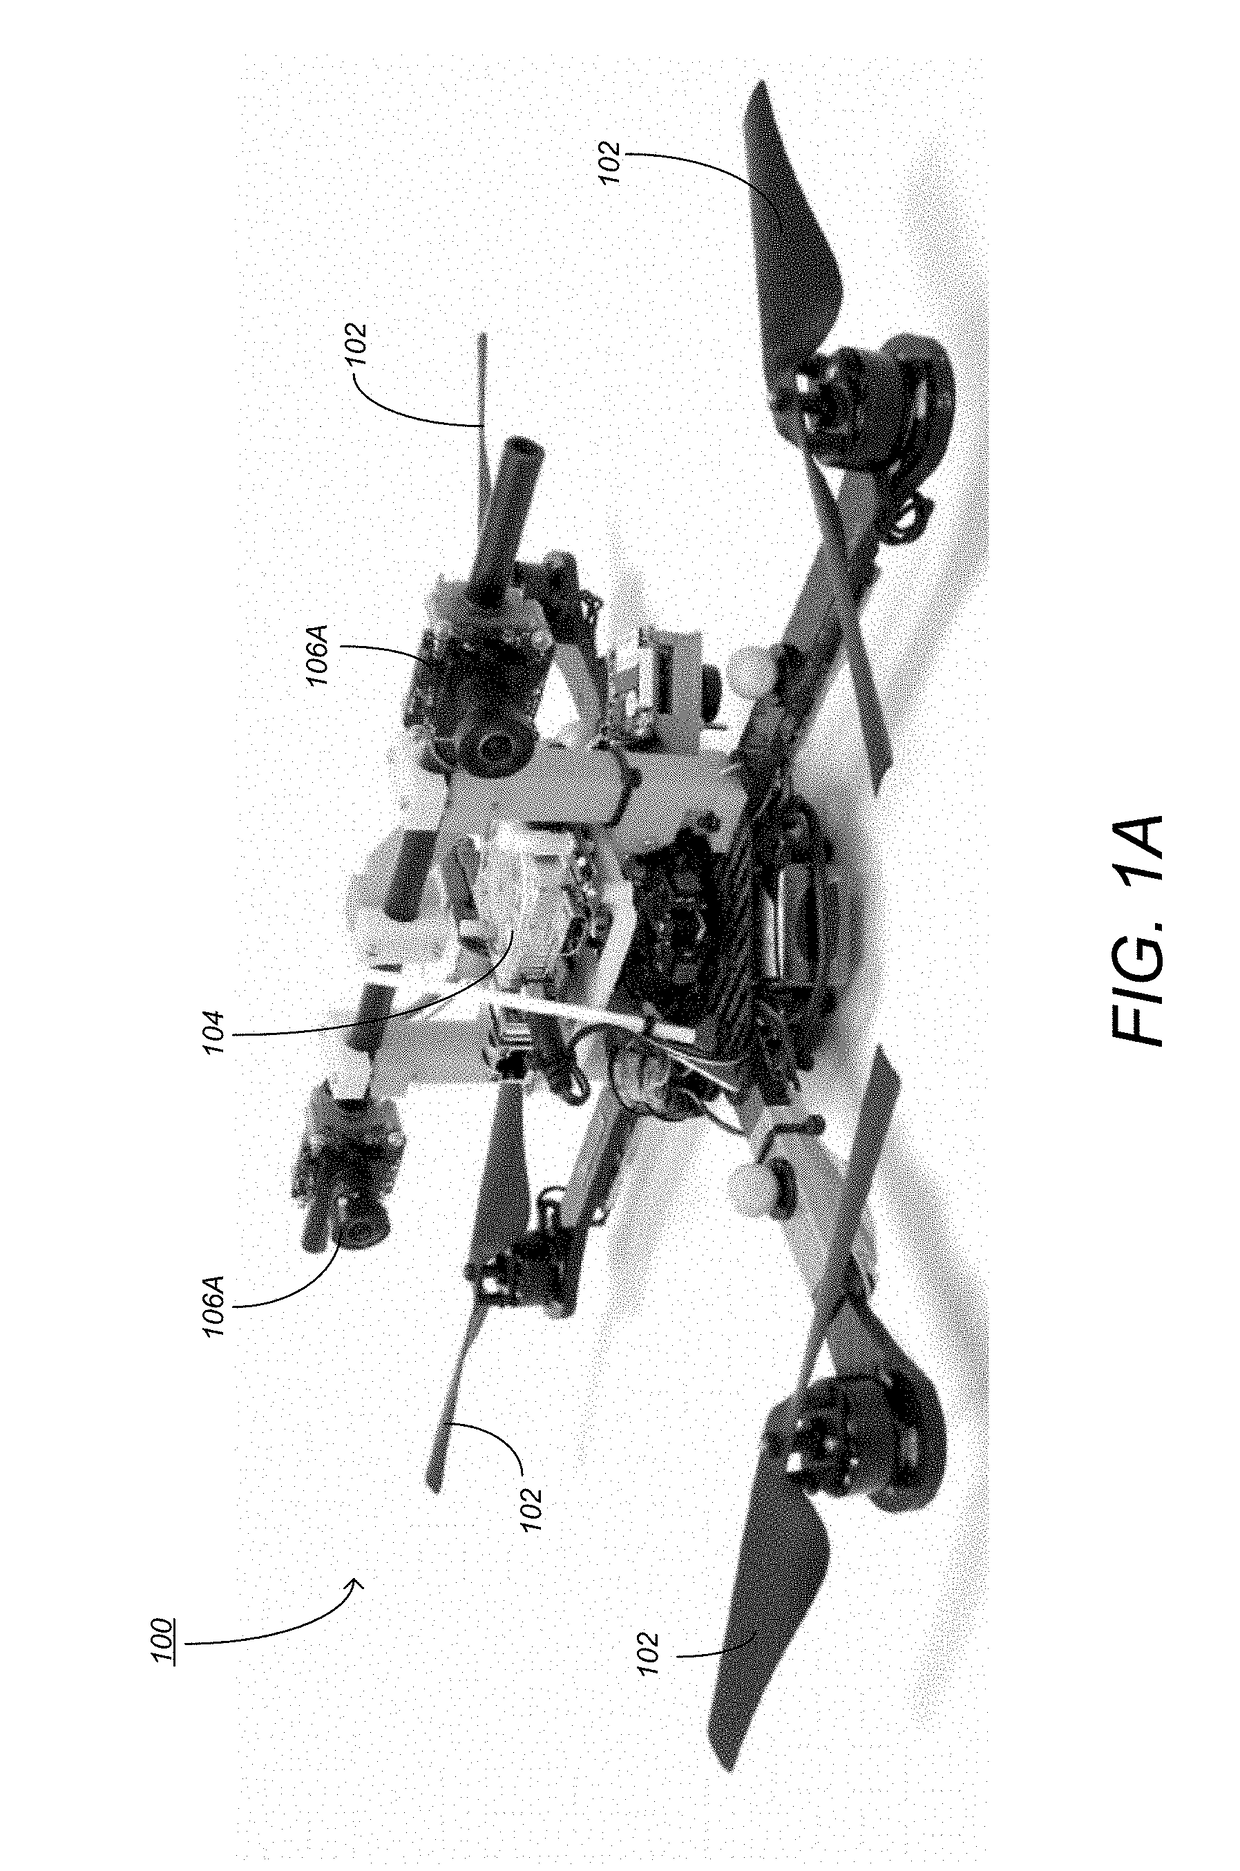 Controlling unmanned aerial vehicles to avoid obstacle collision